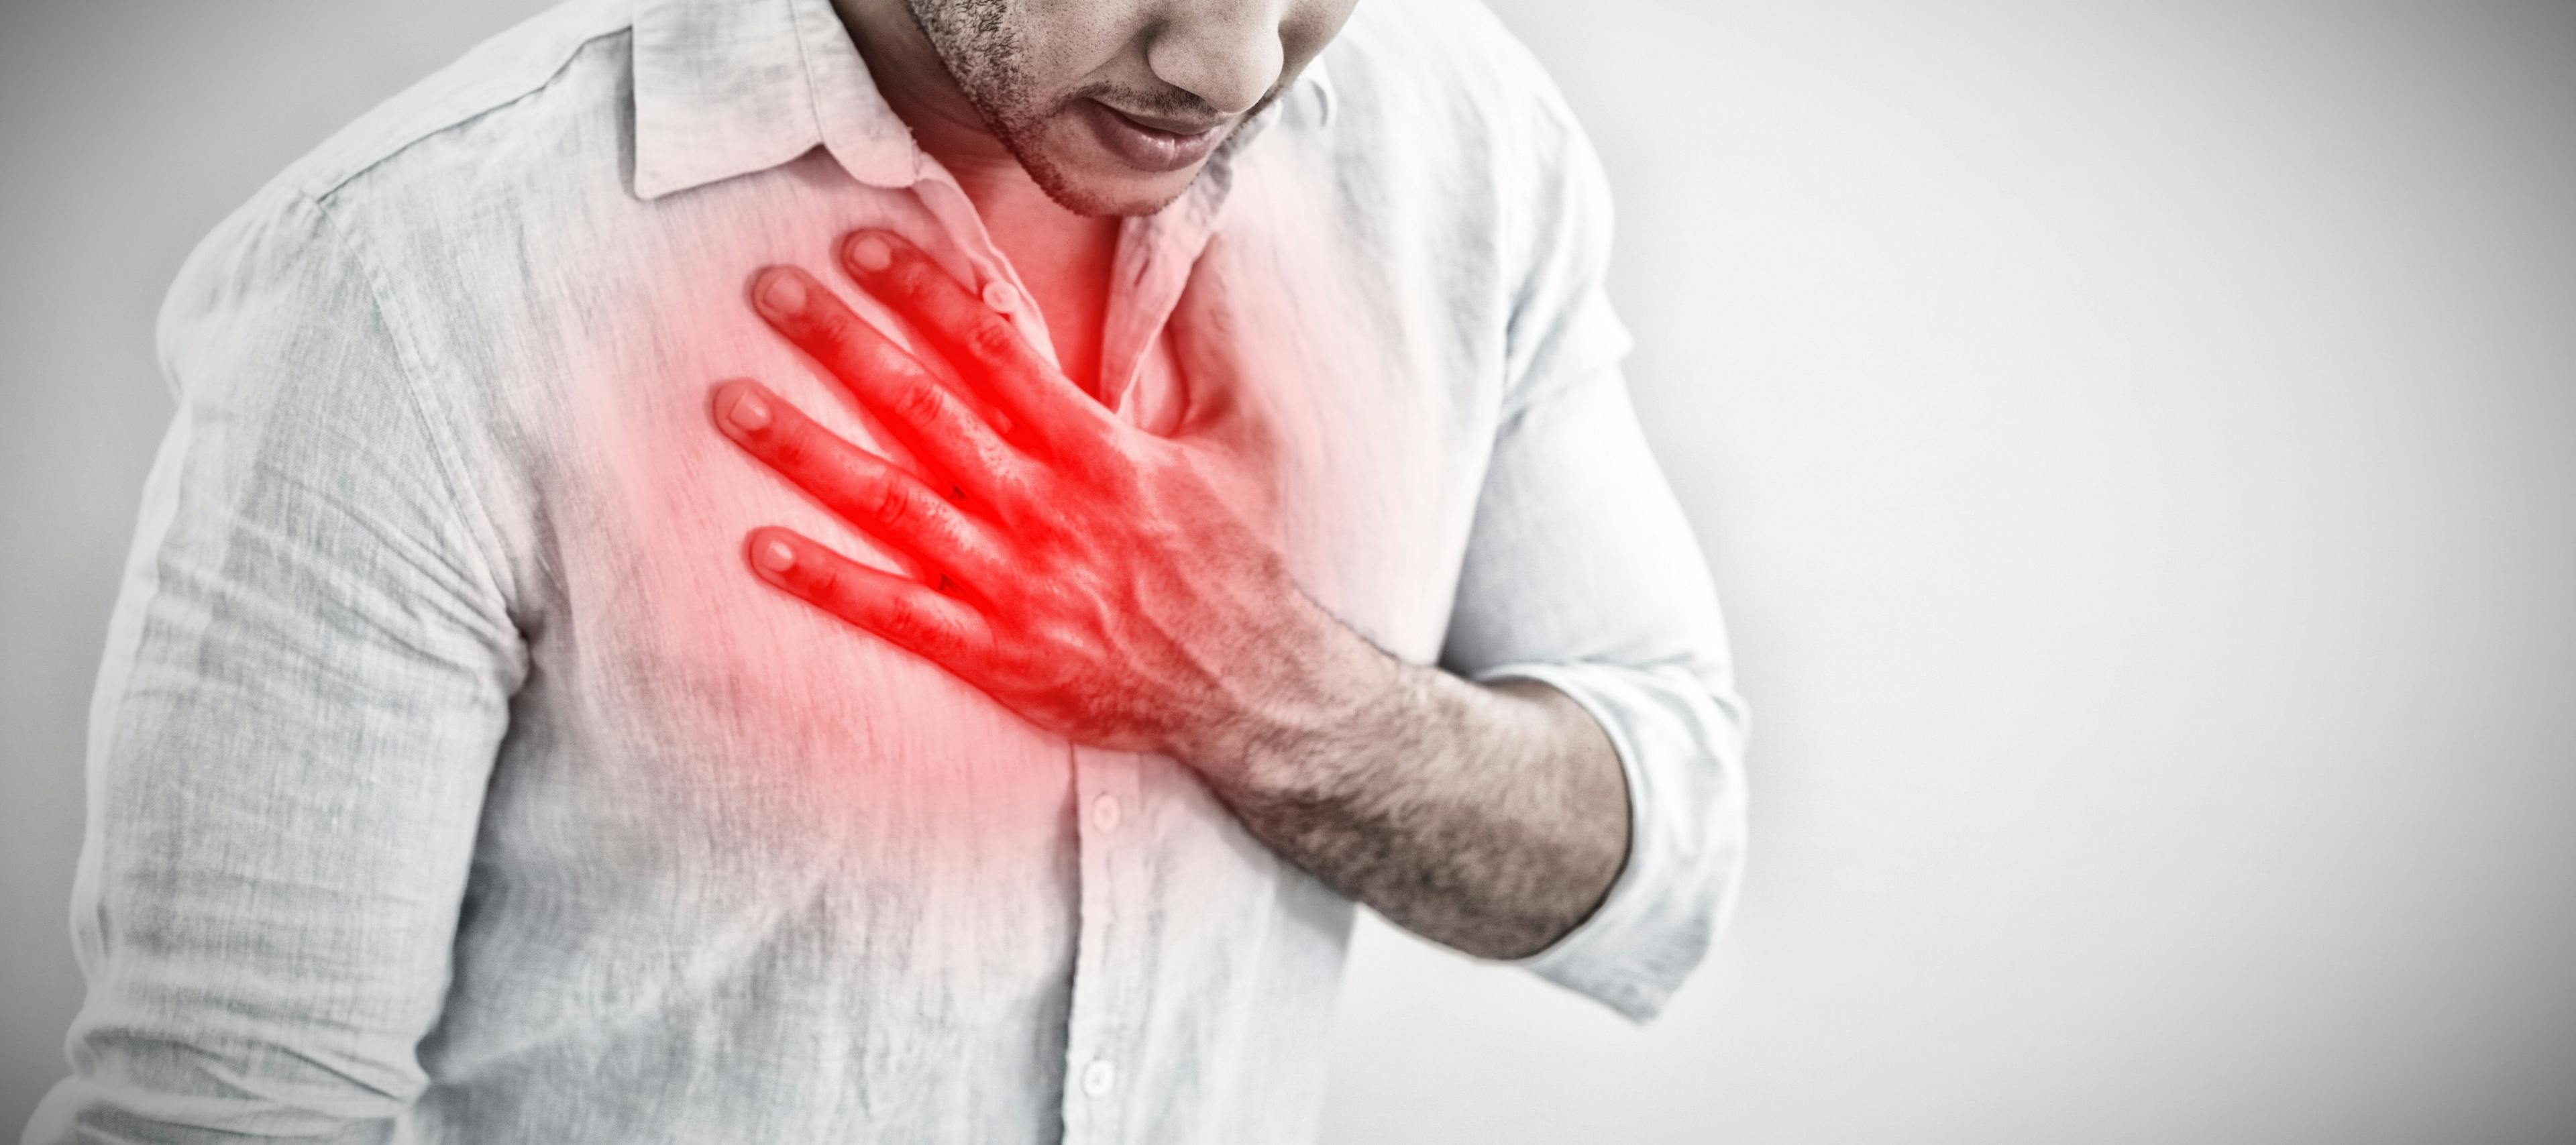 CAC Scores Better for Predicting Heart Attack than Stroke